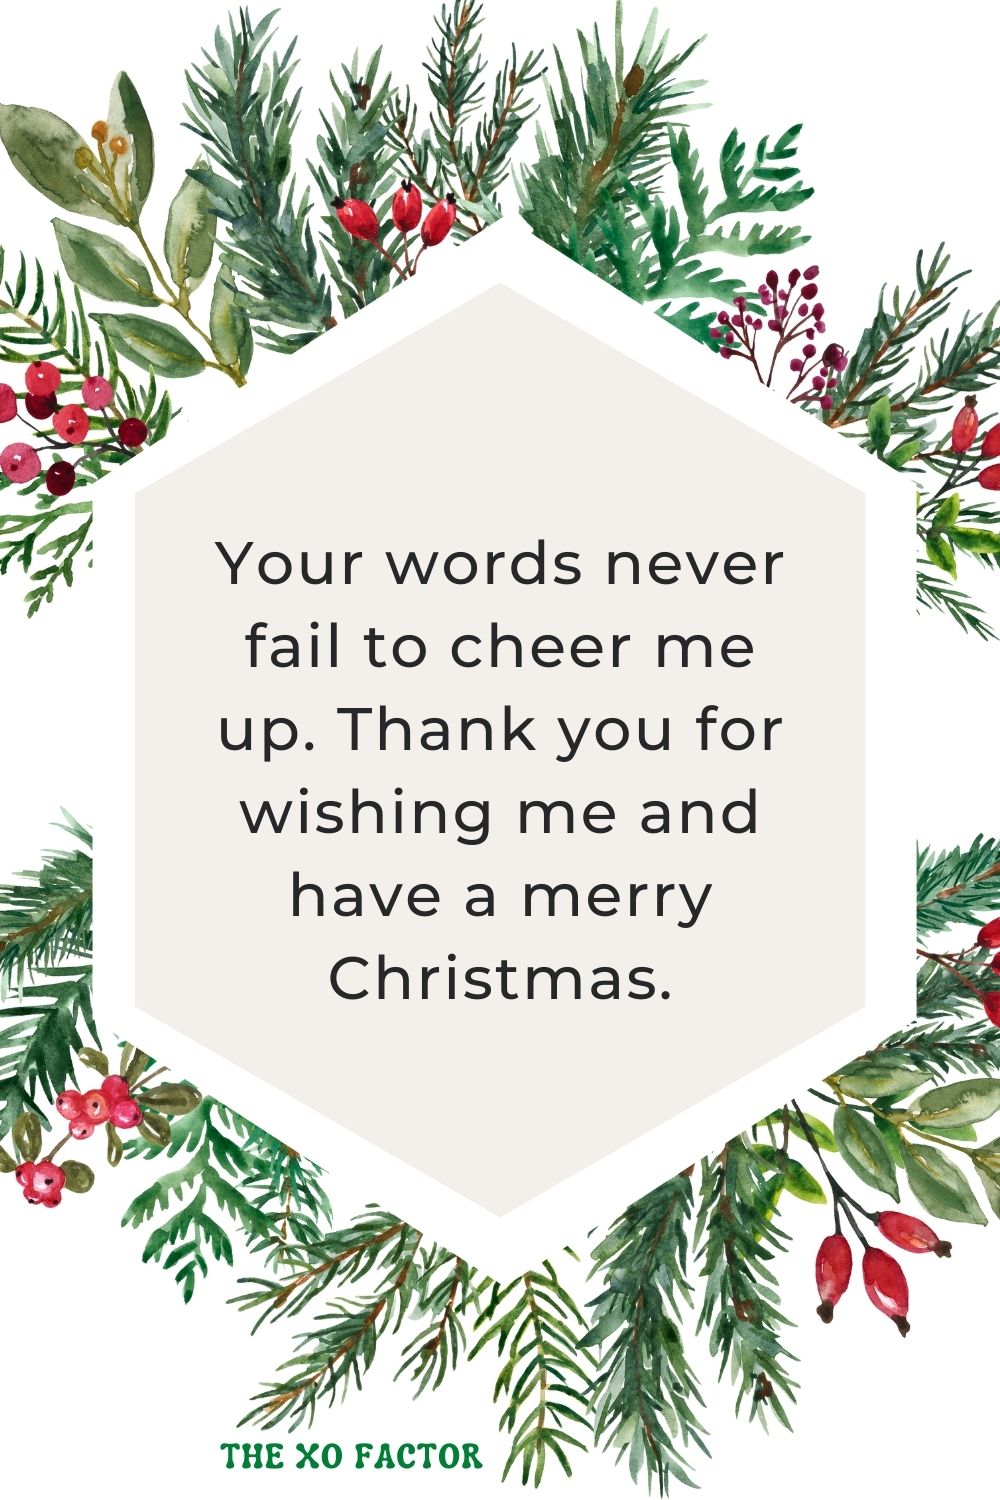 Your words never fail to cheer me up. Thank you for wishing me and have a merry Christmas.